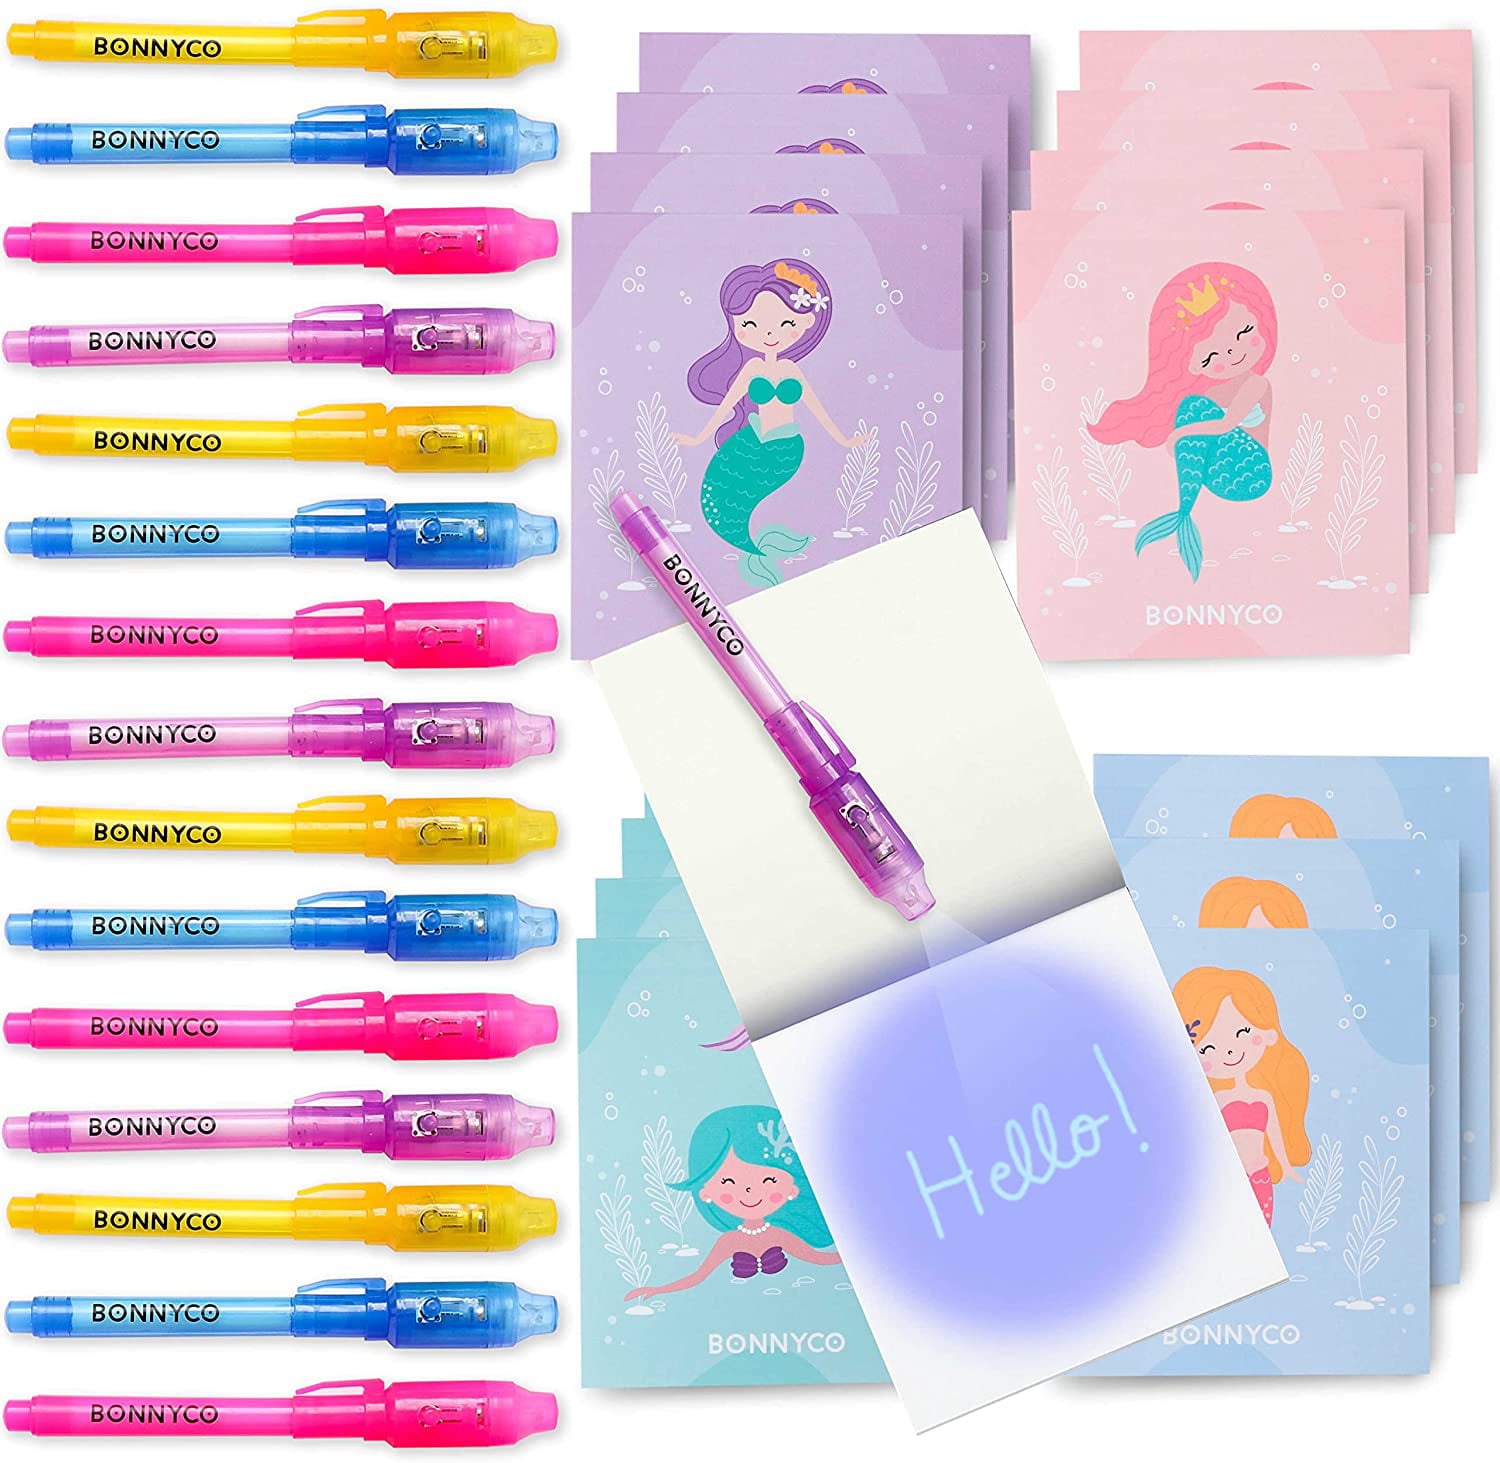 Prizes for Kids Magic Pen Birthday Party Favors Prizes for Students BONNYCO Invisible Ink Pen and Notebook Pack of 16 Unicorn Party Favors for Kids Spy Pen Unicorn Birthday Party Supplies 